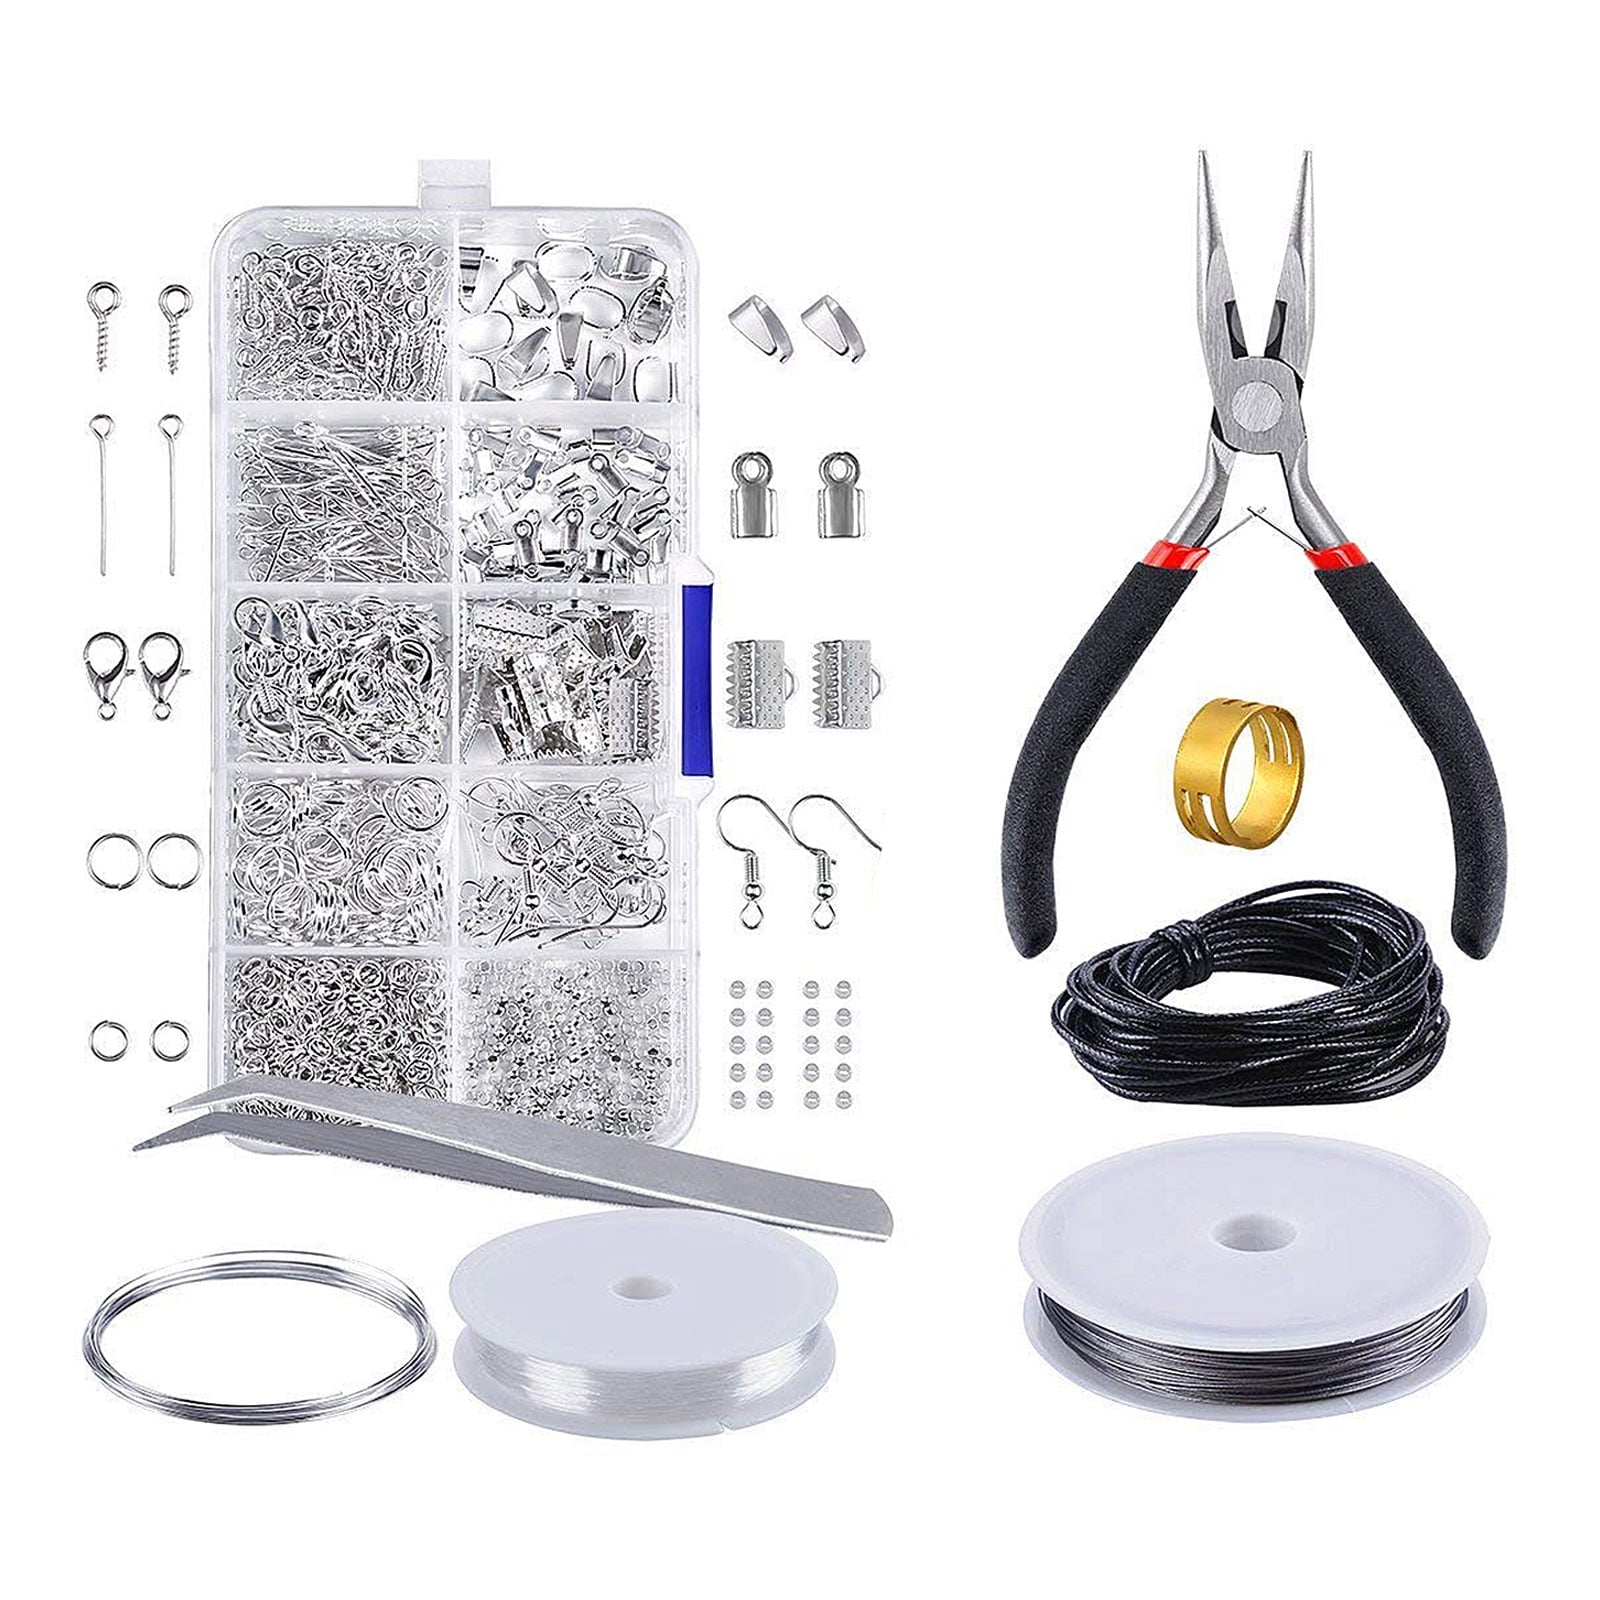 Wire Jewelry Making Starter Kit Craft Tool for Bracelet Necklace Earrings Making 